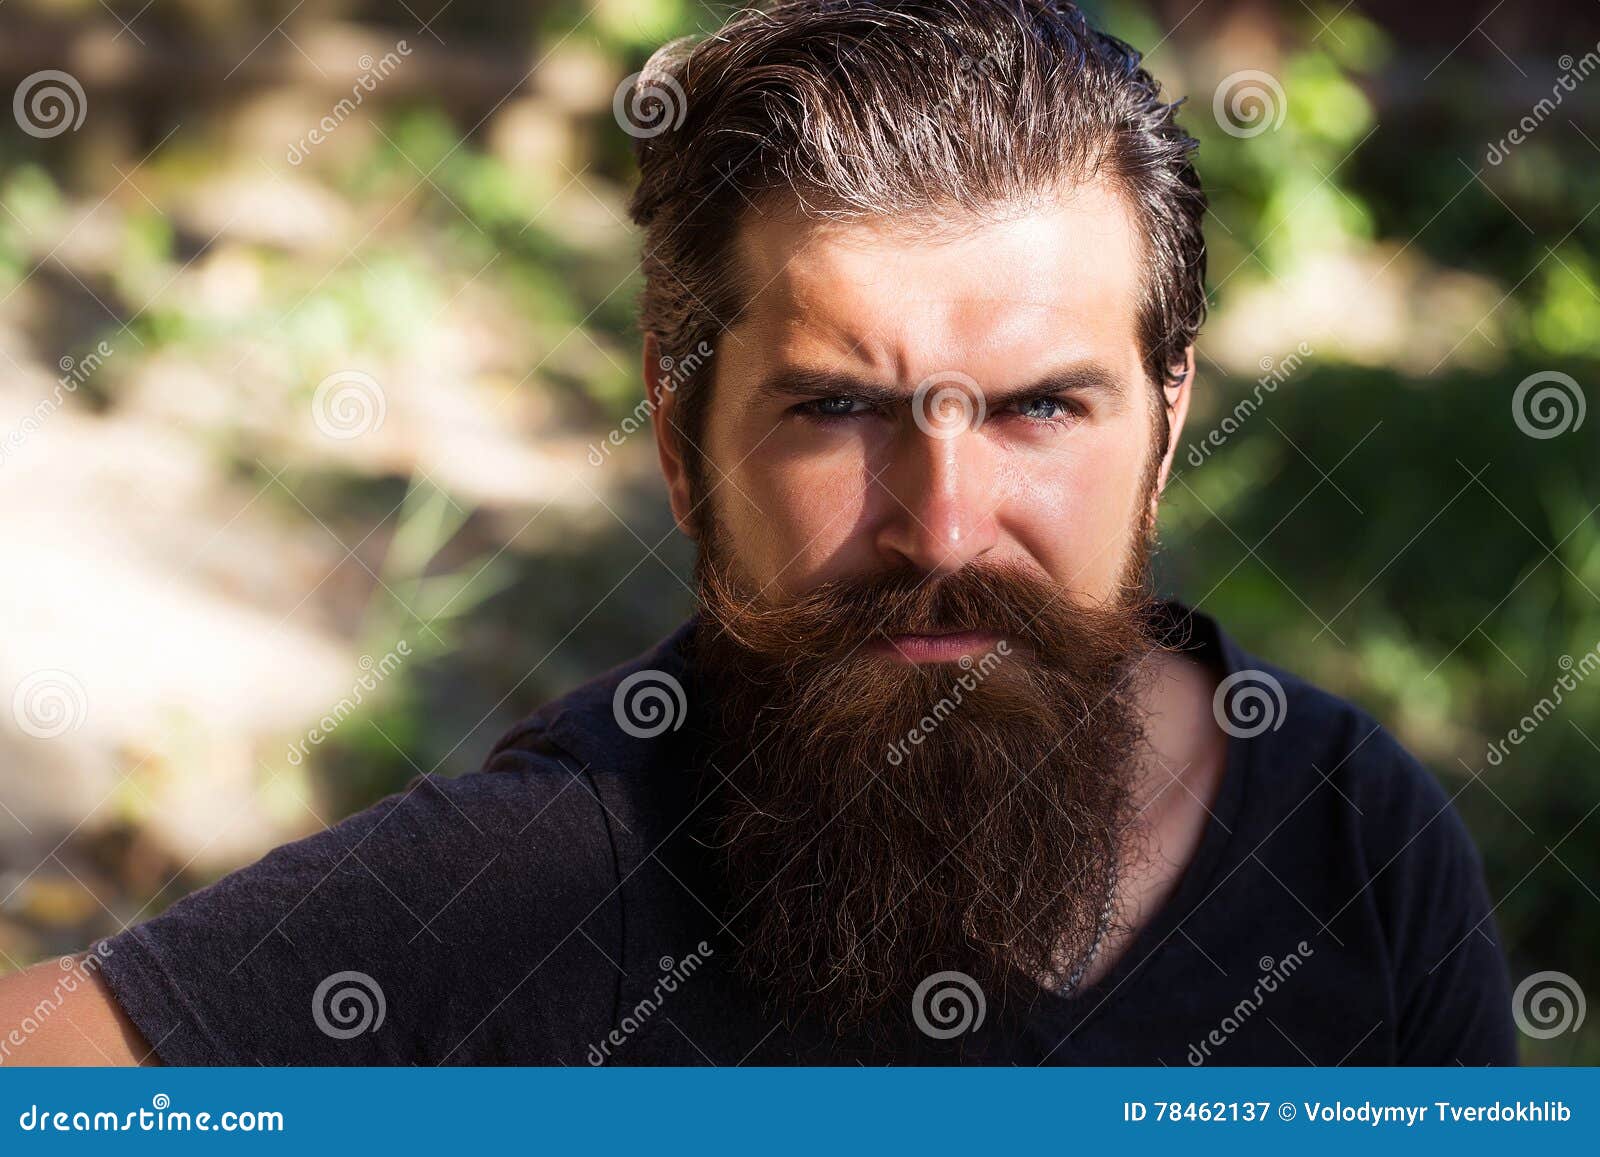 Handsome hipster man stock image. Image of beard, outdoors - 78462137